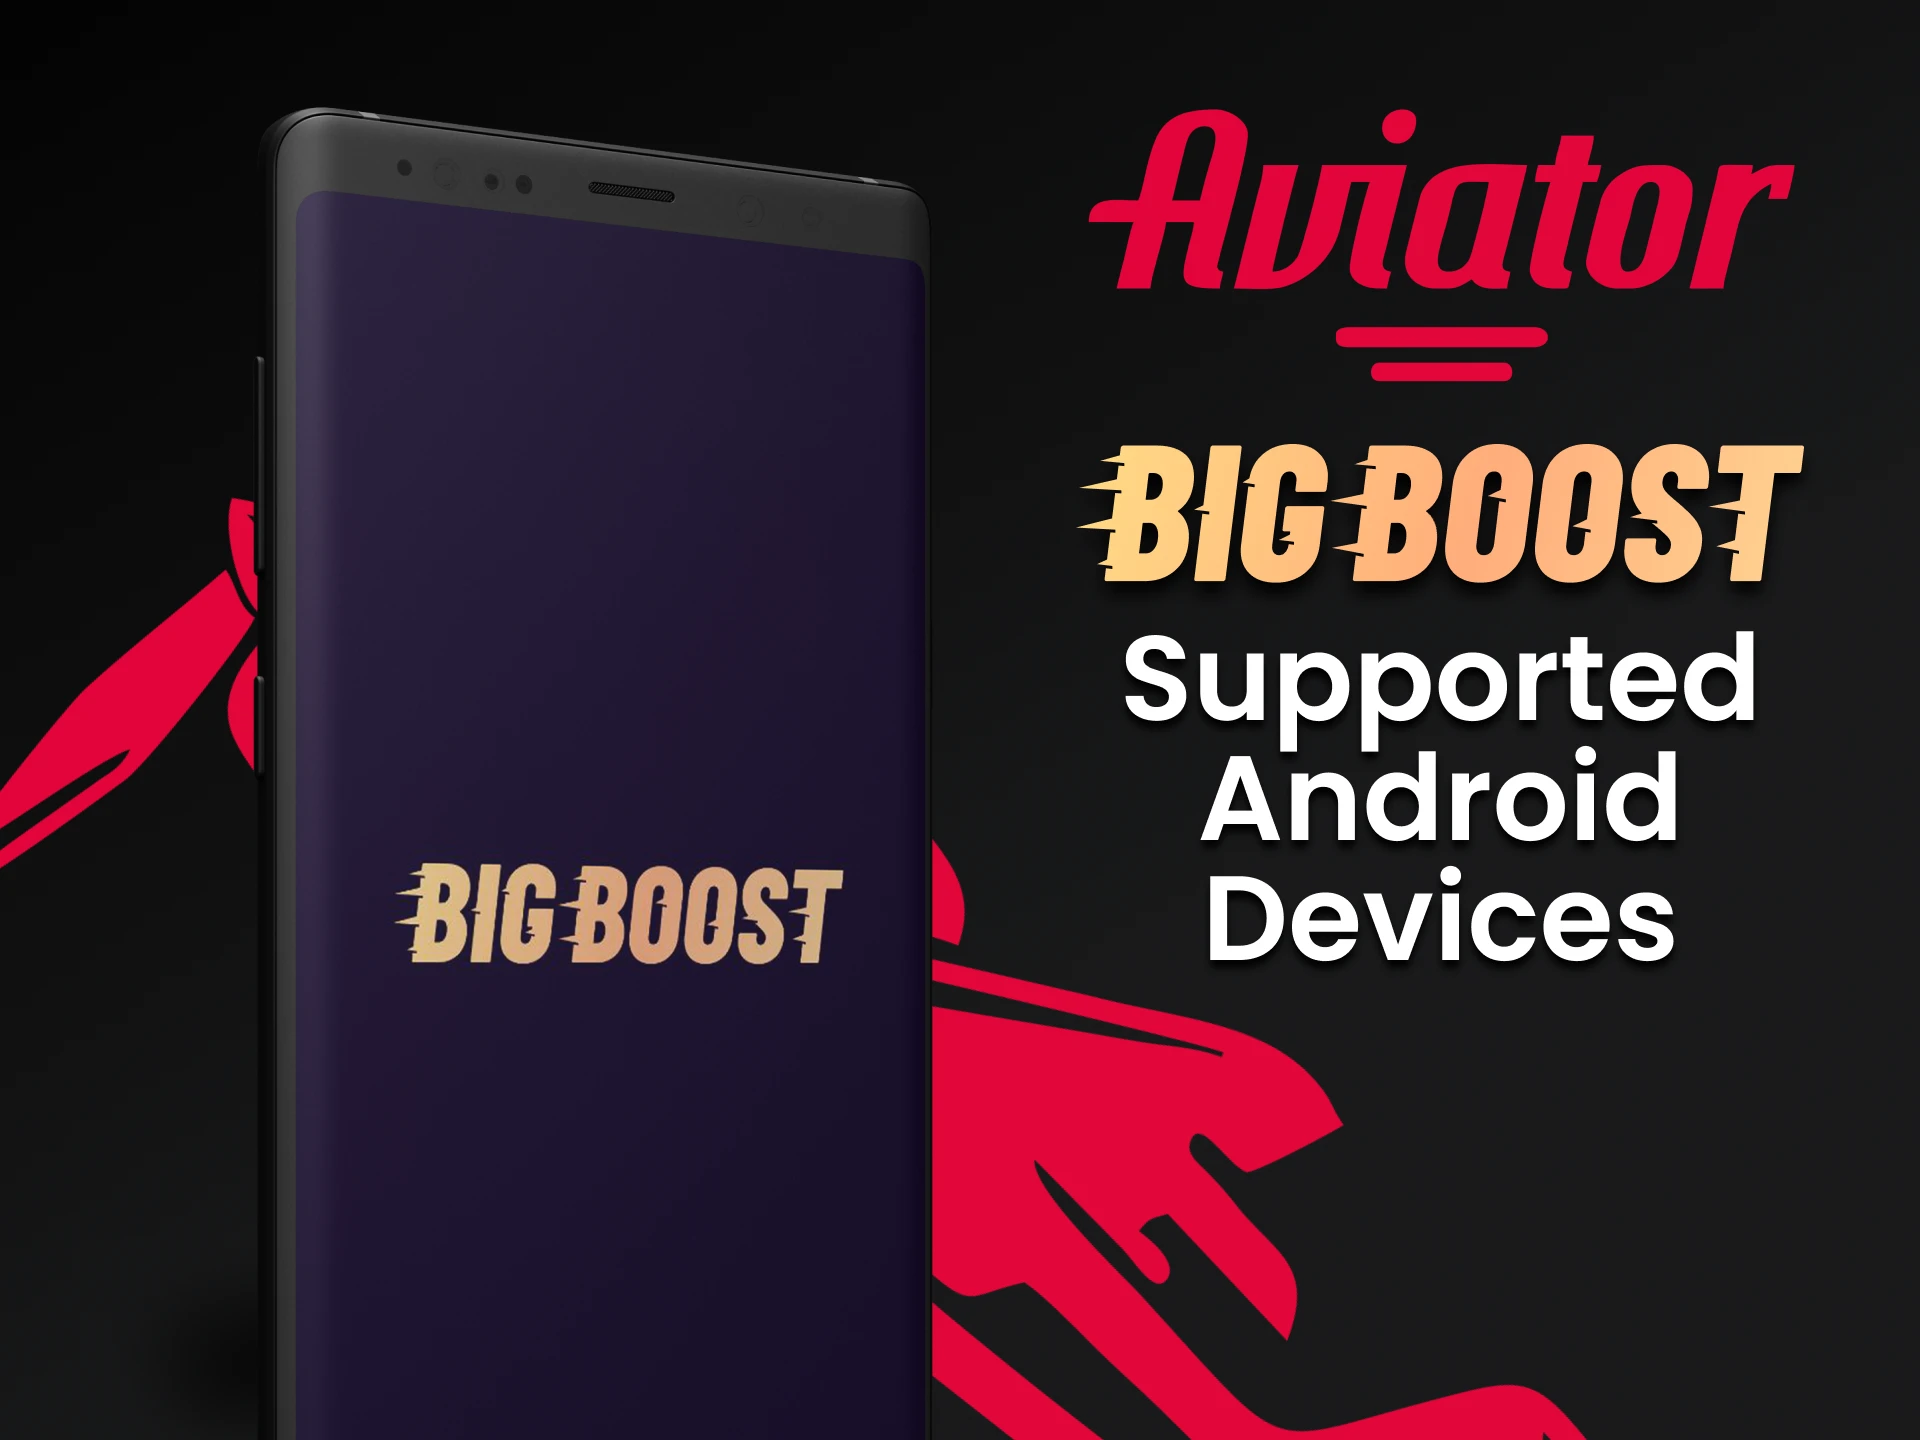 Choose Android devices to play Aviator in the Big Boost app.